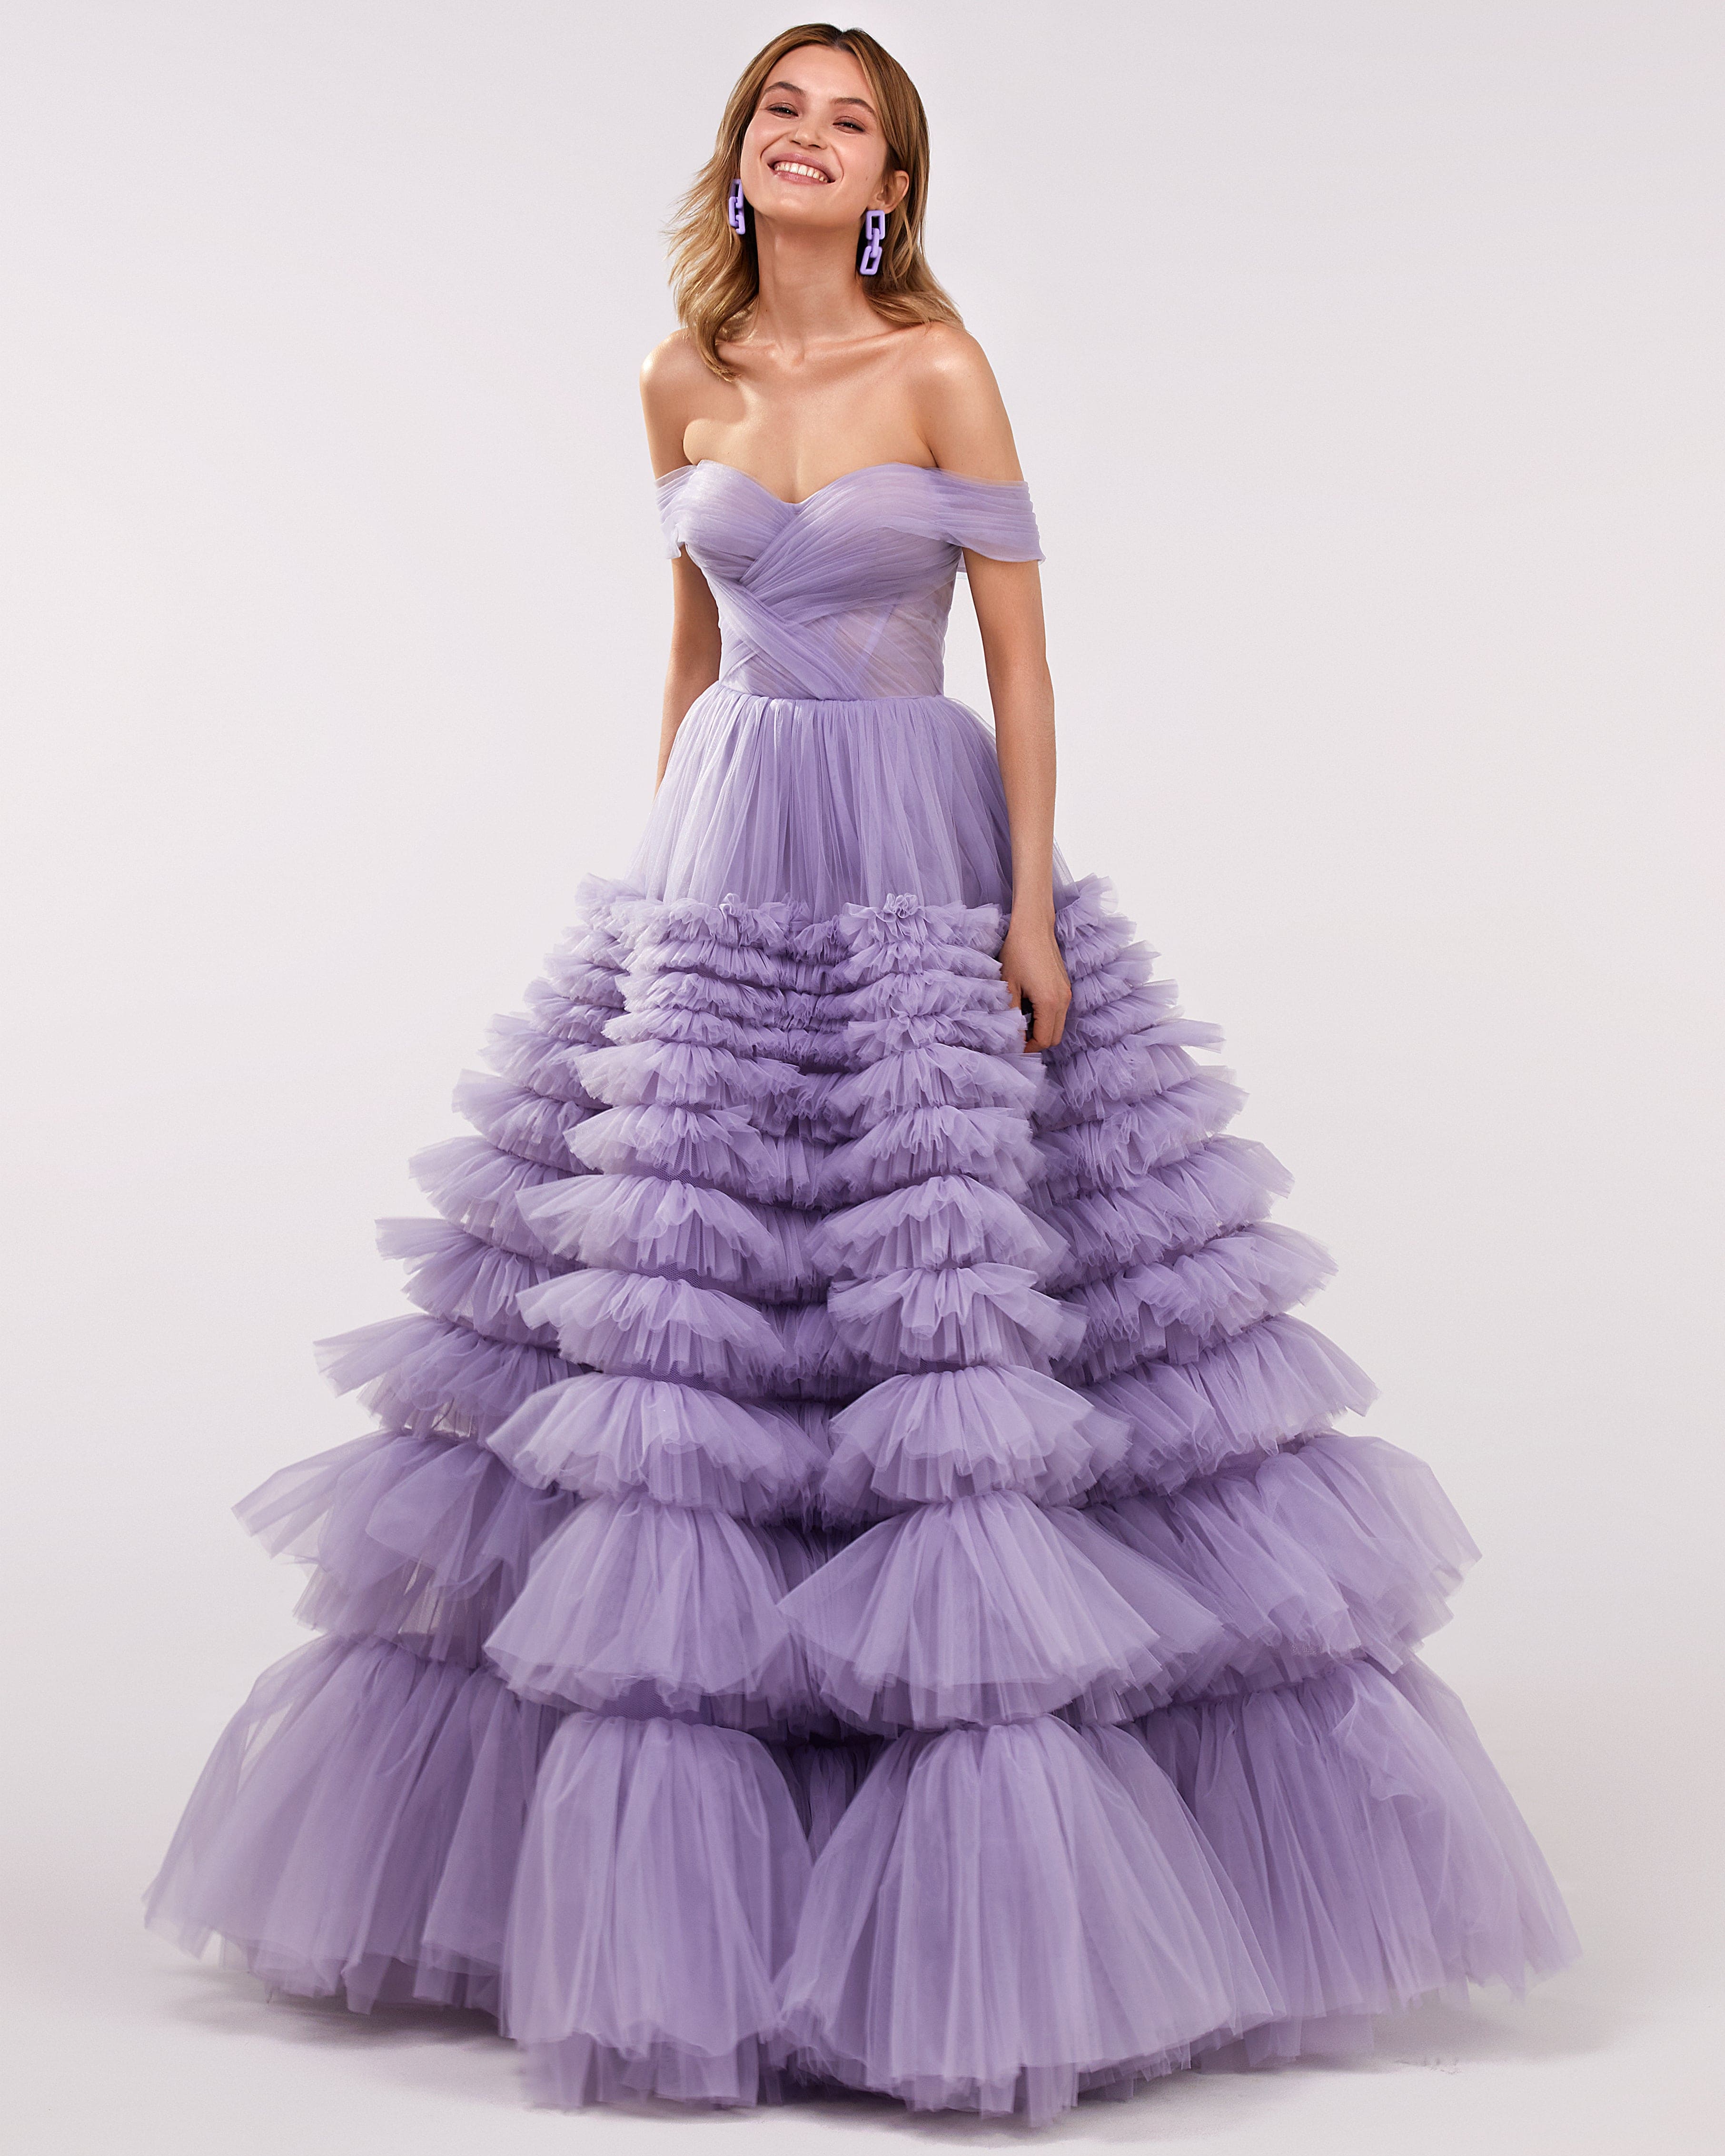 Discover more than 84 ball gowns usa latest